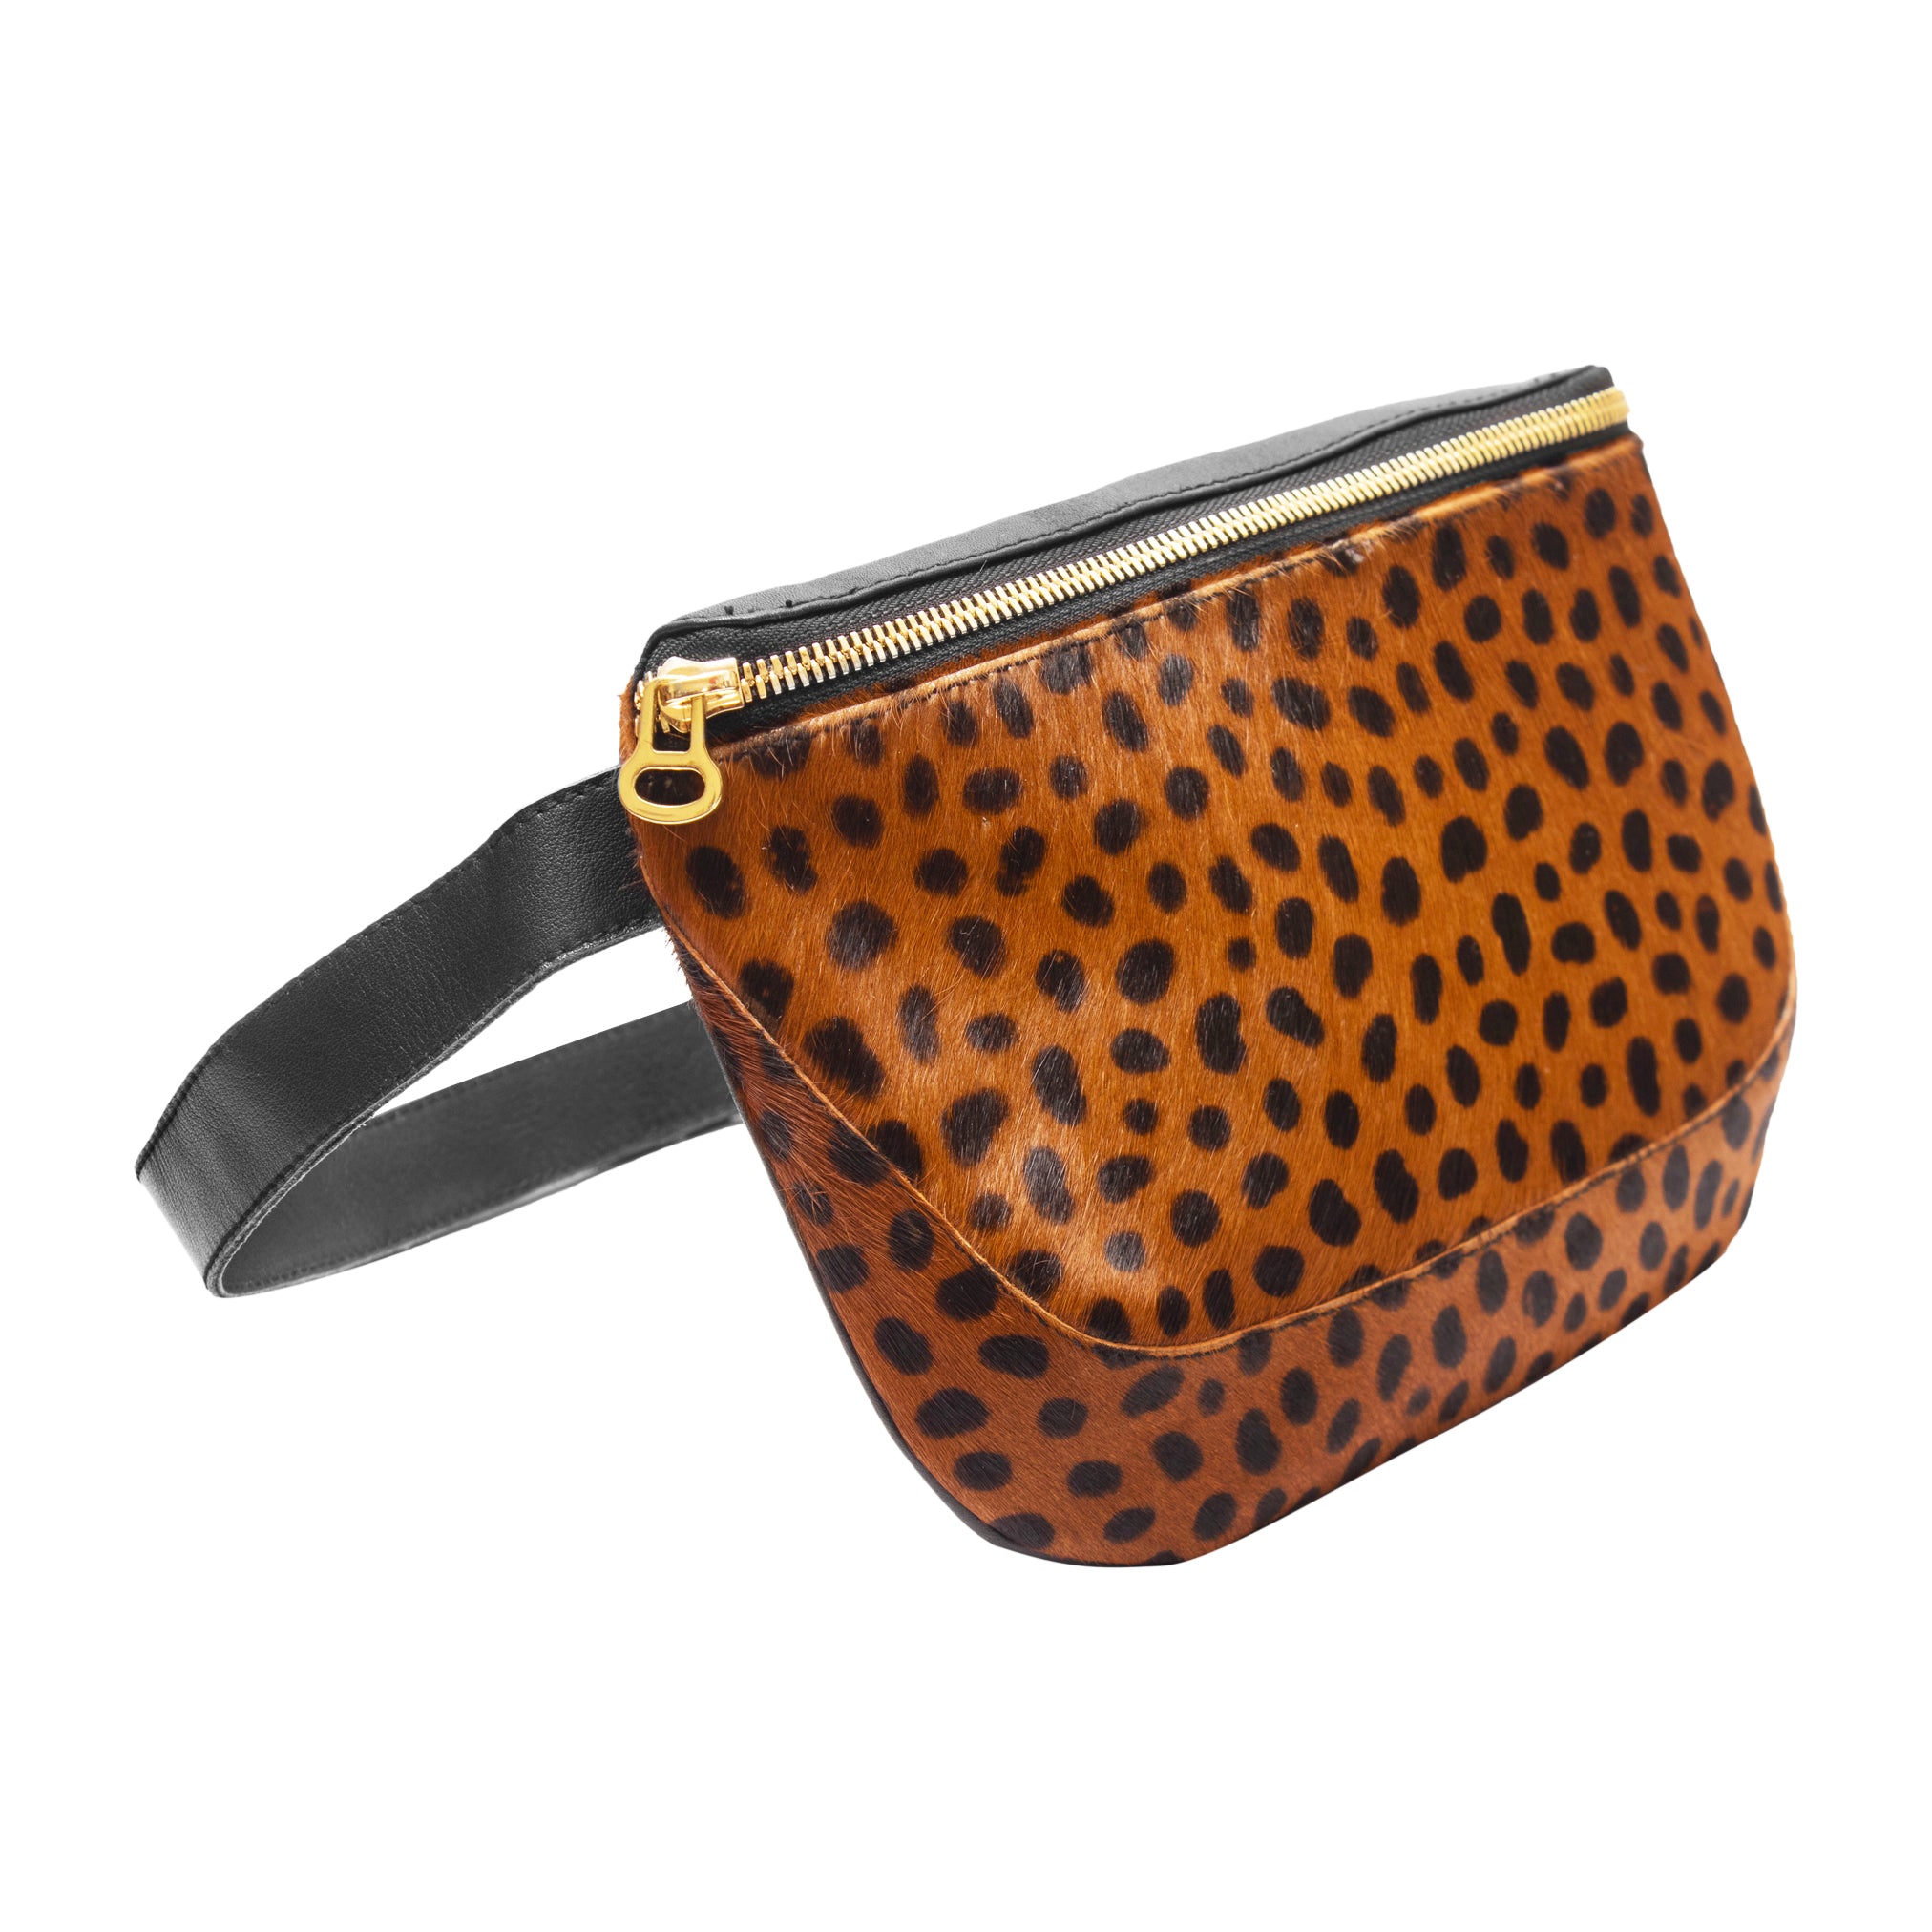 Leopard and Black Leather Fanny Pack